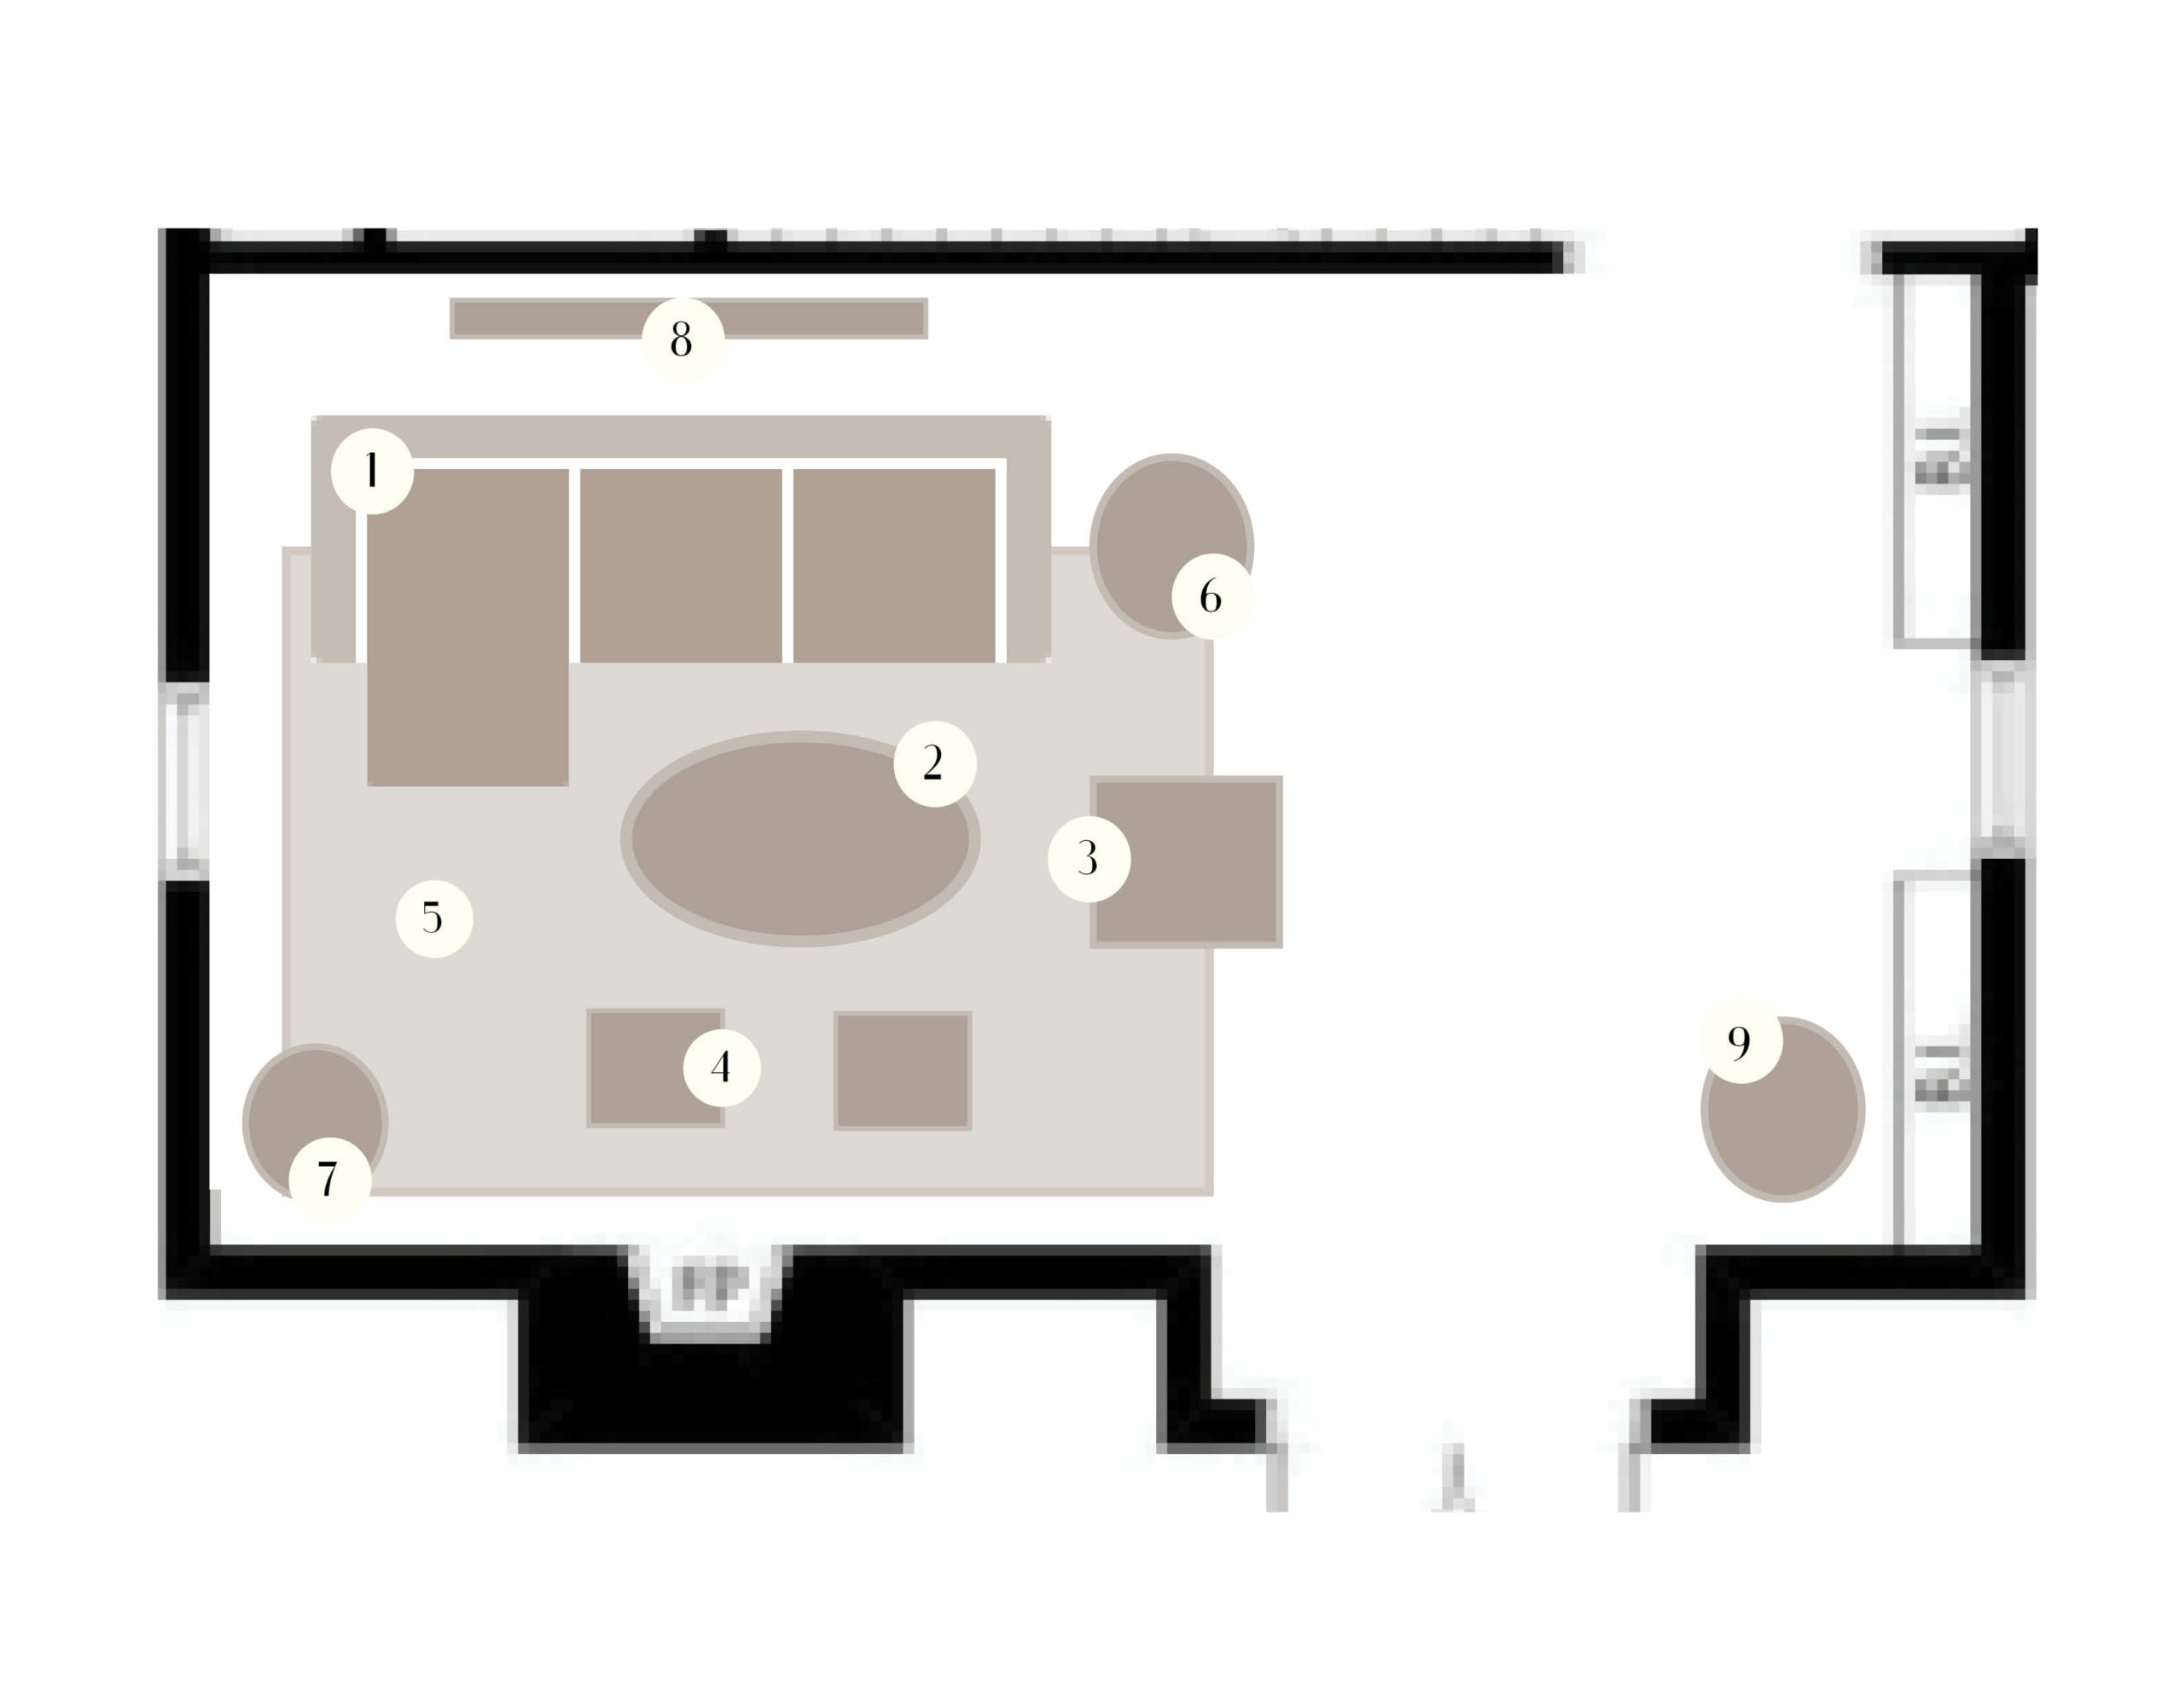 Figuring out the best living room layout